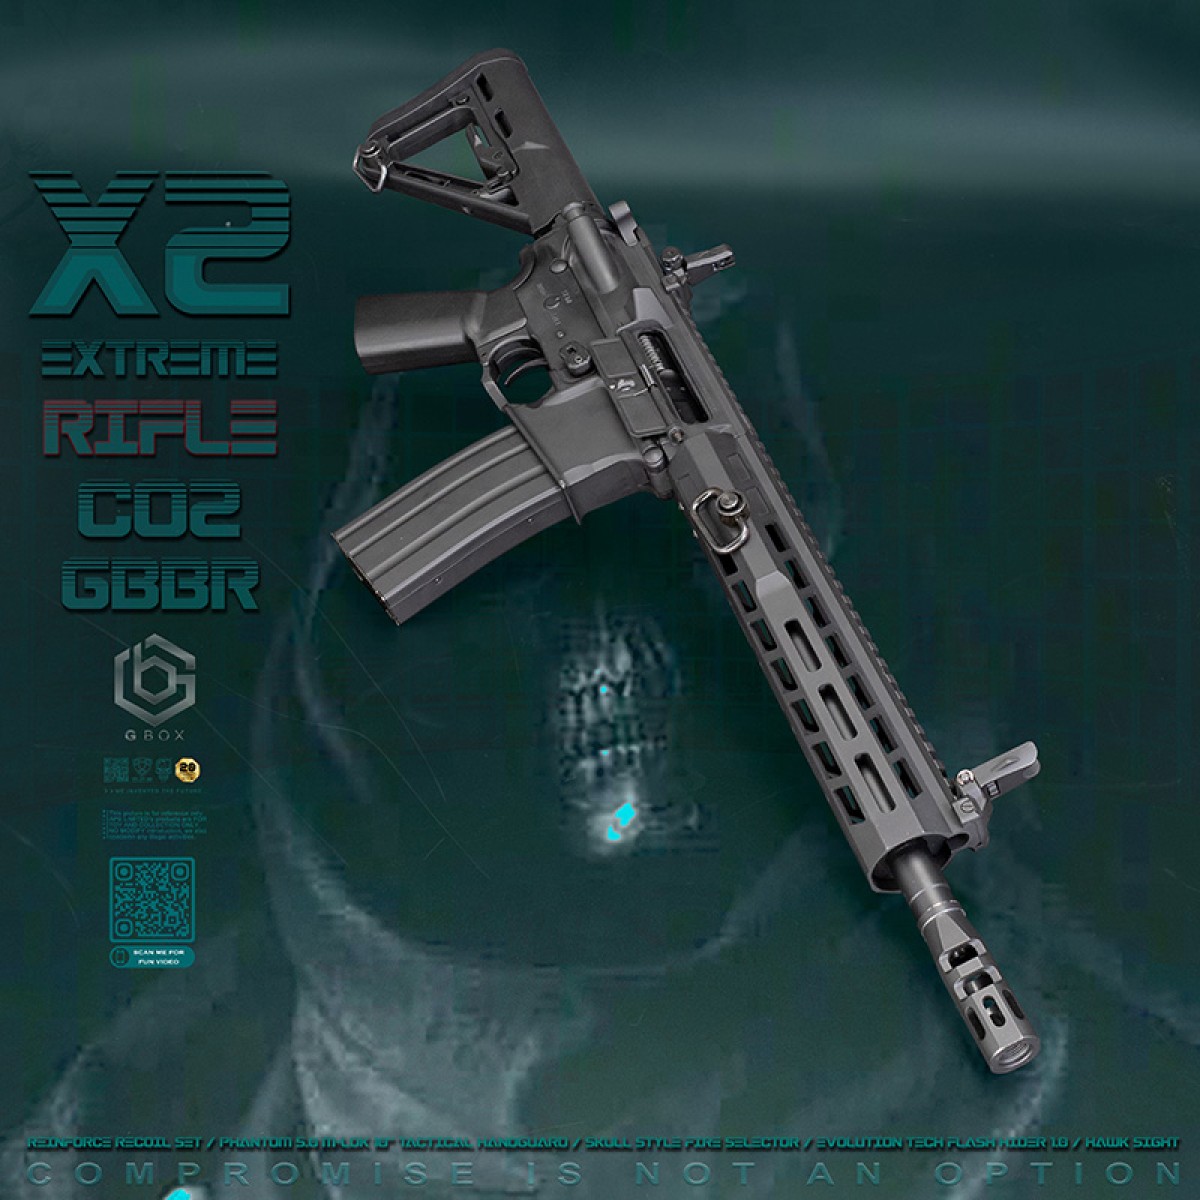 X2 Xtreme CO2 Blow Back Airsoft Rifle [APS]